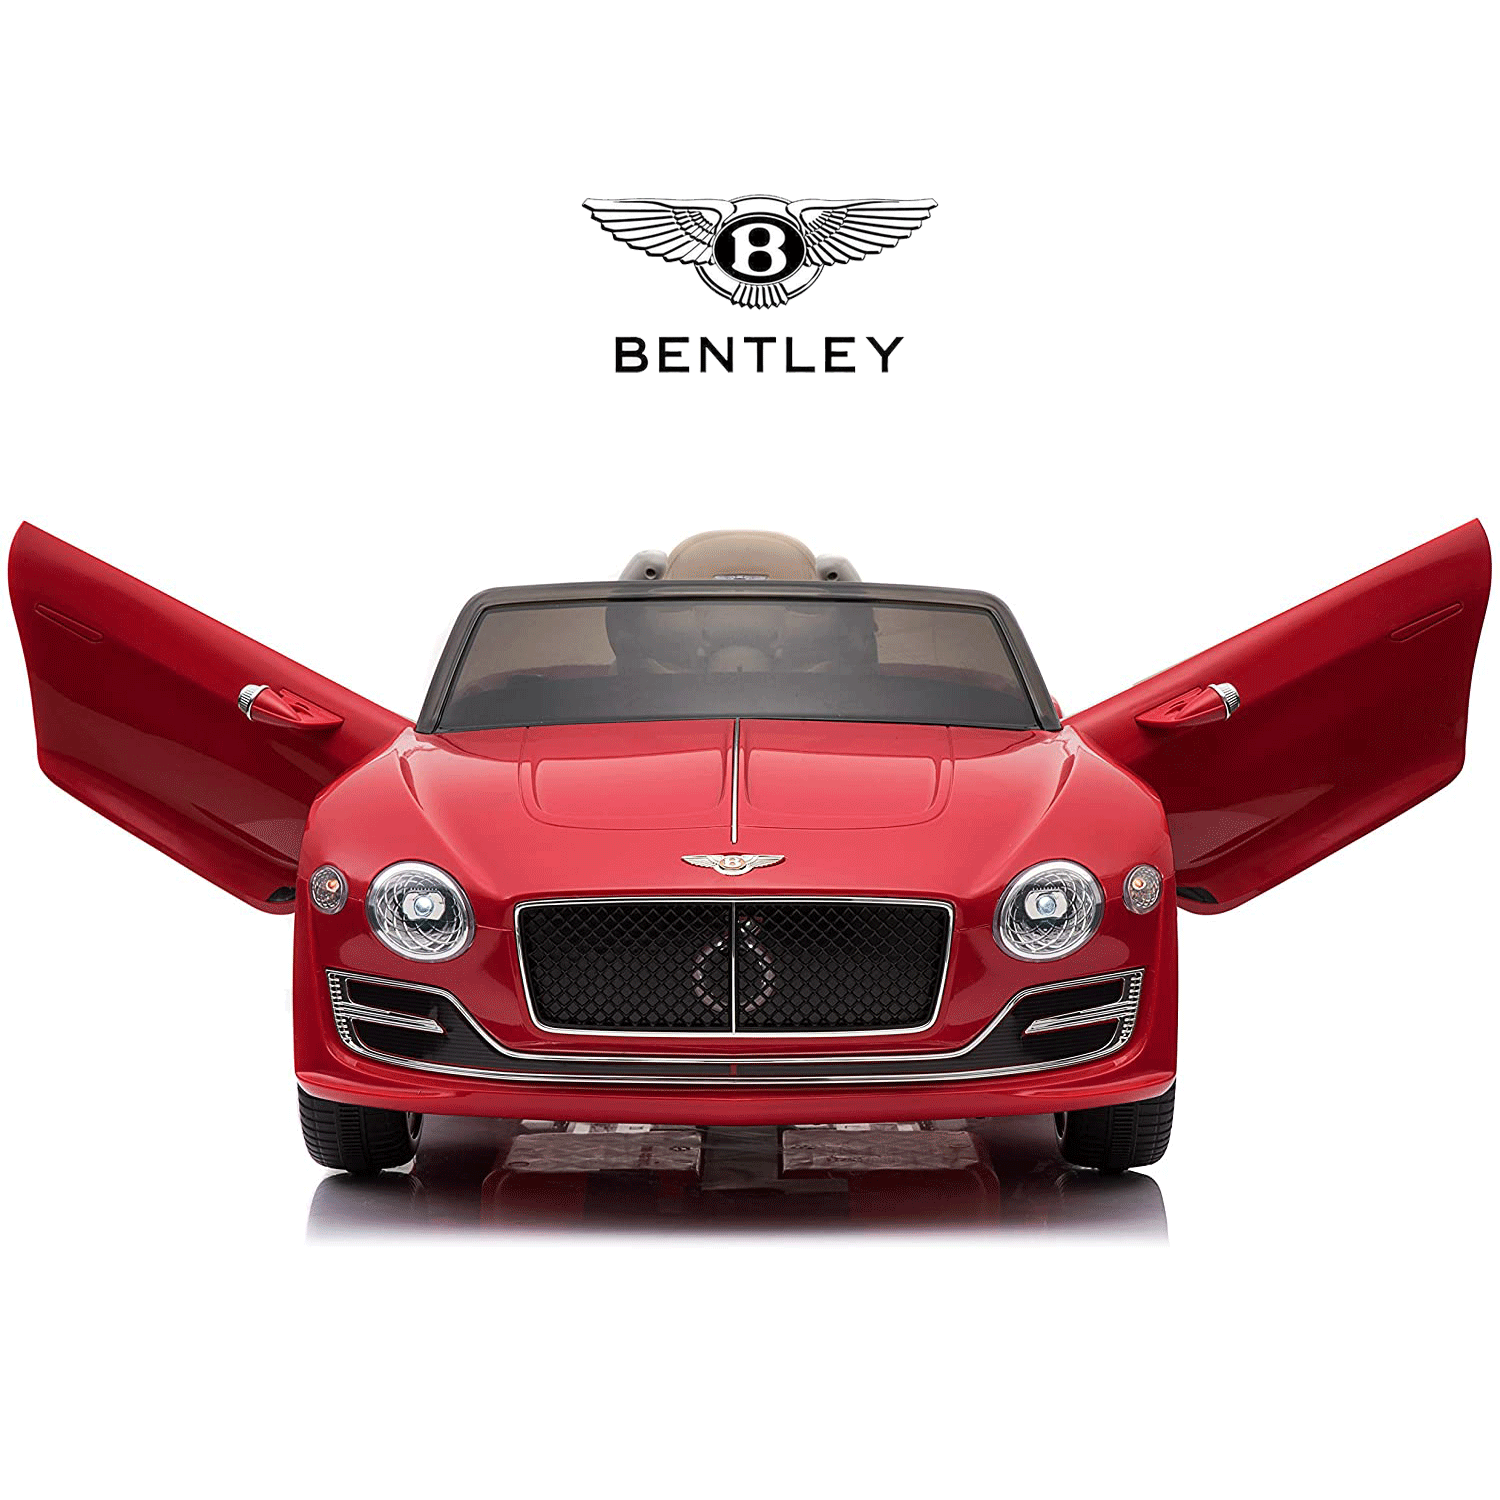 LISUEYNE Official Licensed Bentley Ride on Car,12V Electric Vehicles for Boys Girls,RC,Music,Red